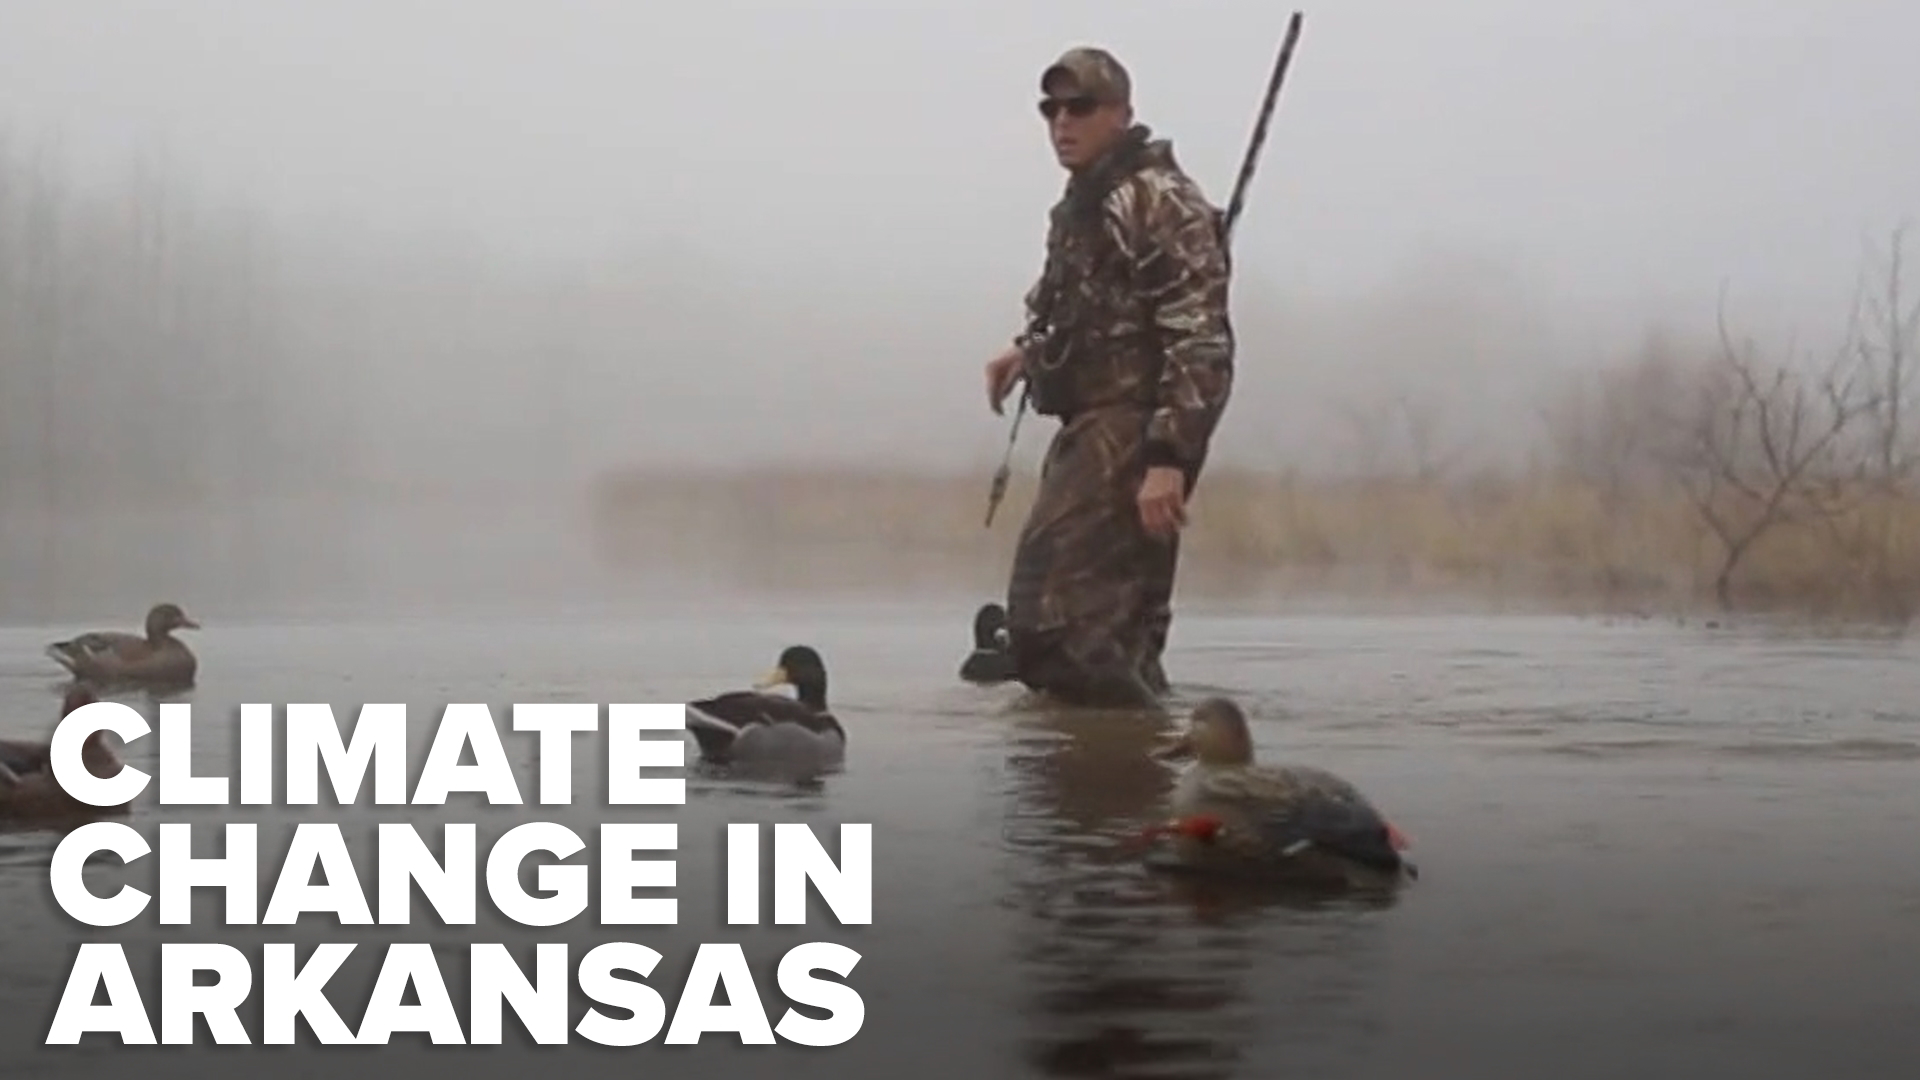 Skot Covert looks at how the changes in weather is impacting duck hunting, mosquitos, and farming in the Natural State.